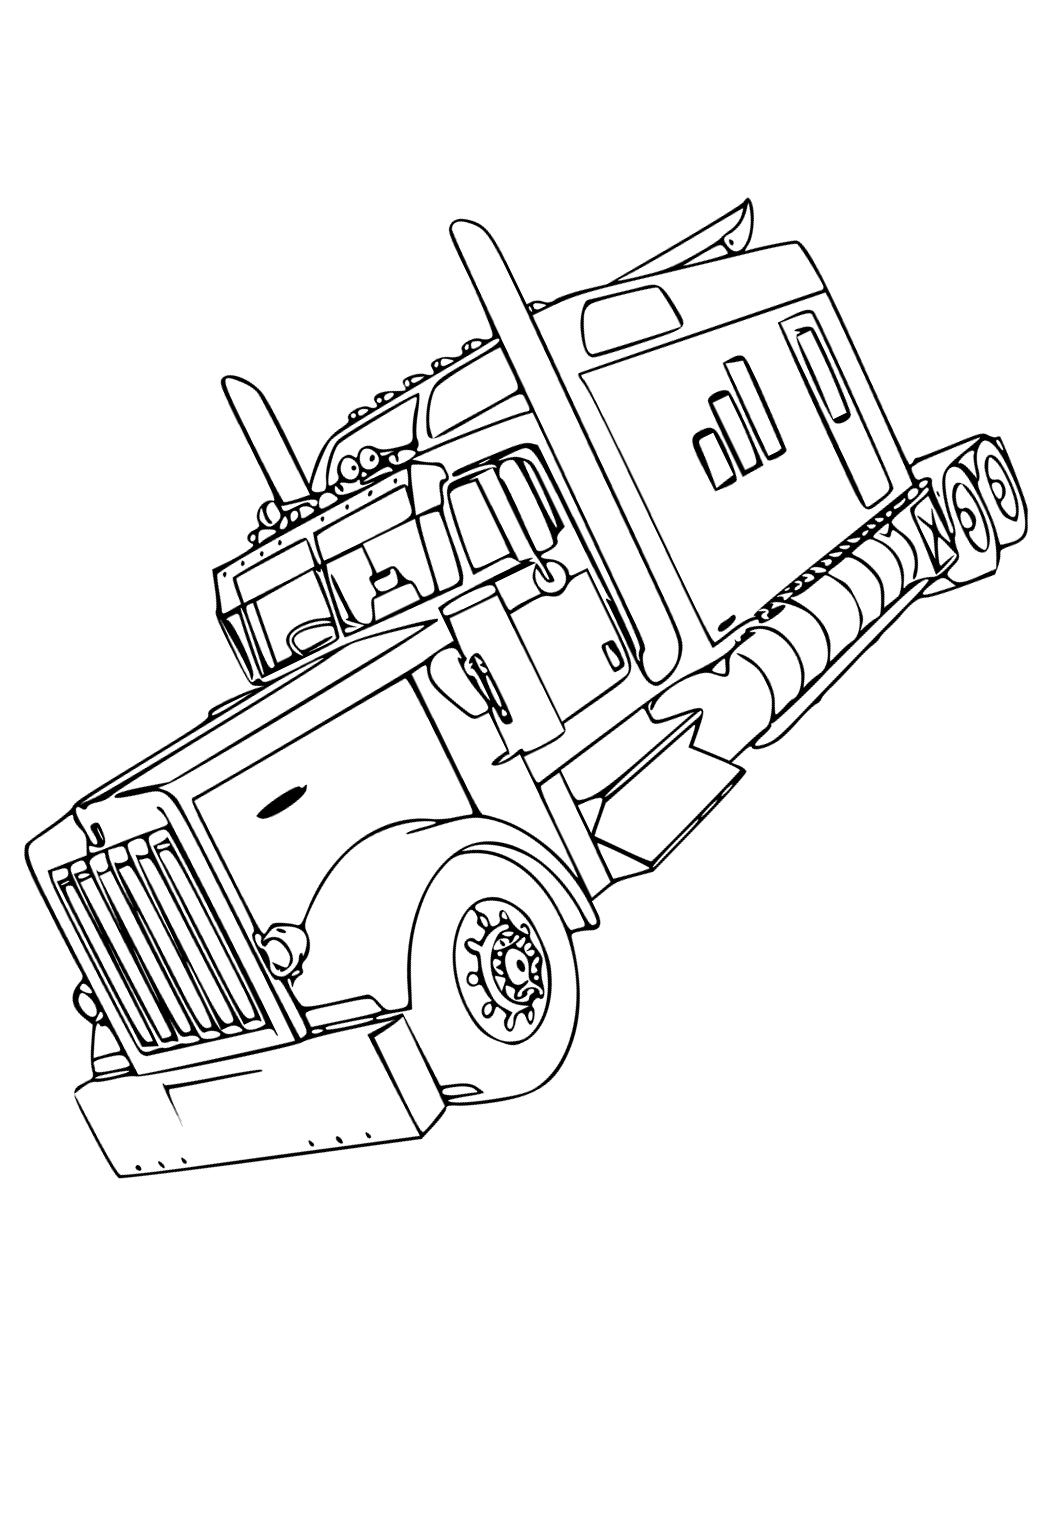 Free printable semi truck real coloring page for adults and kids